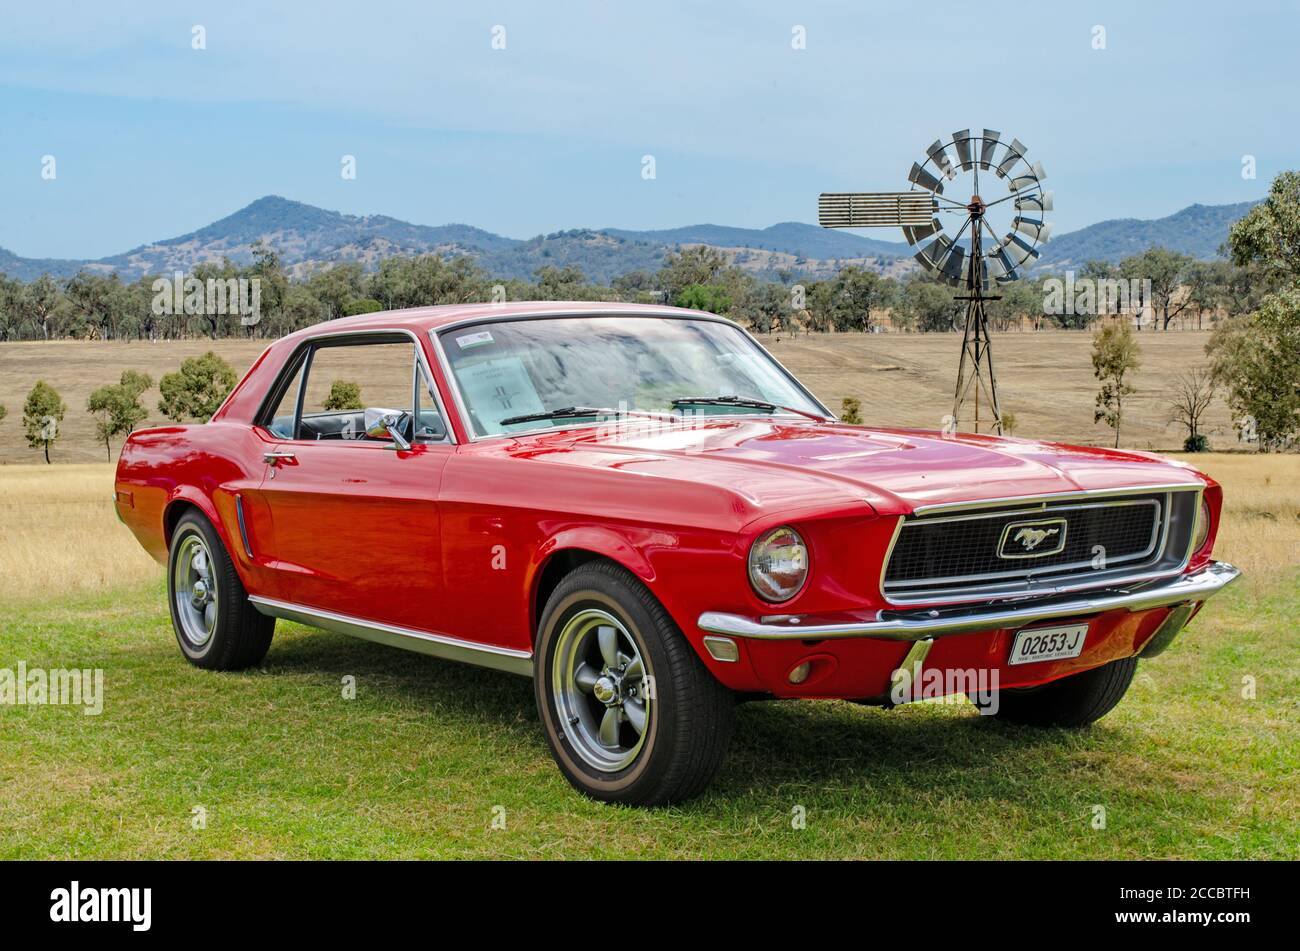 Bright Red 1968 Ford Mustang V8 First Generation Hardtop Coupe Stock Photo  - Alamy